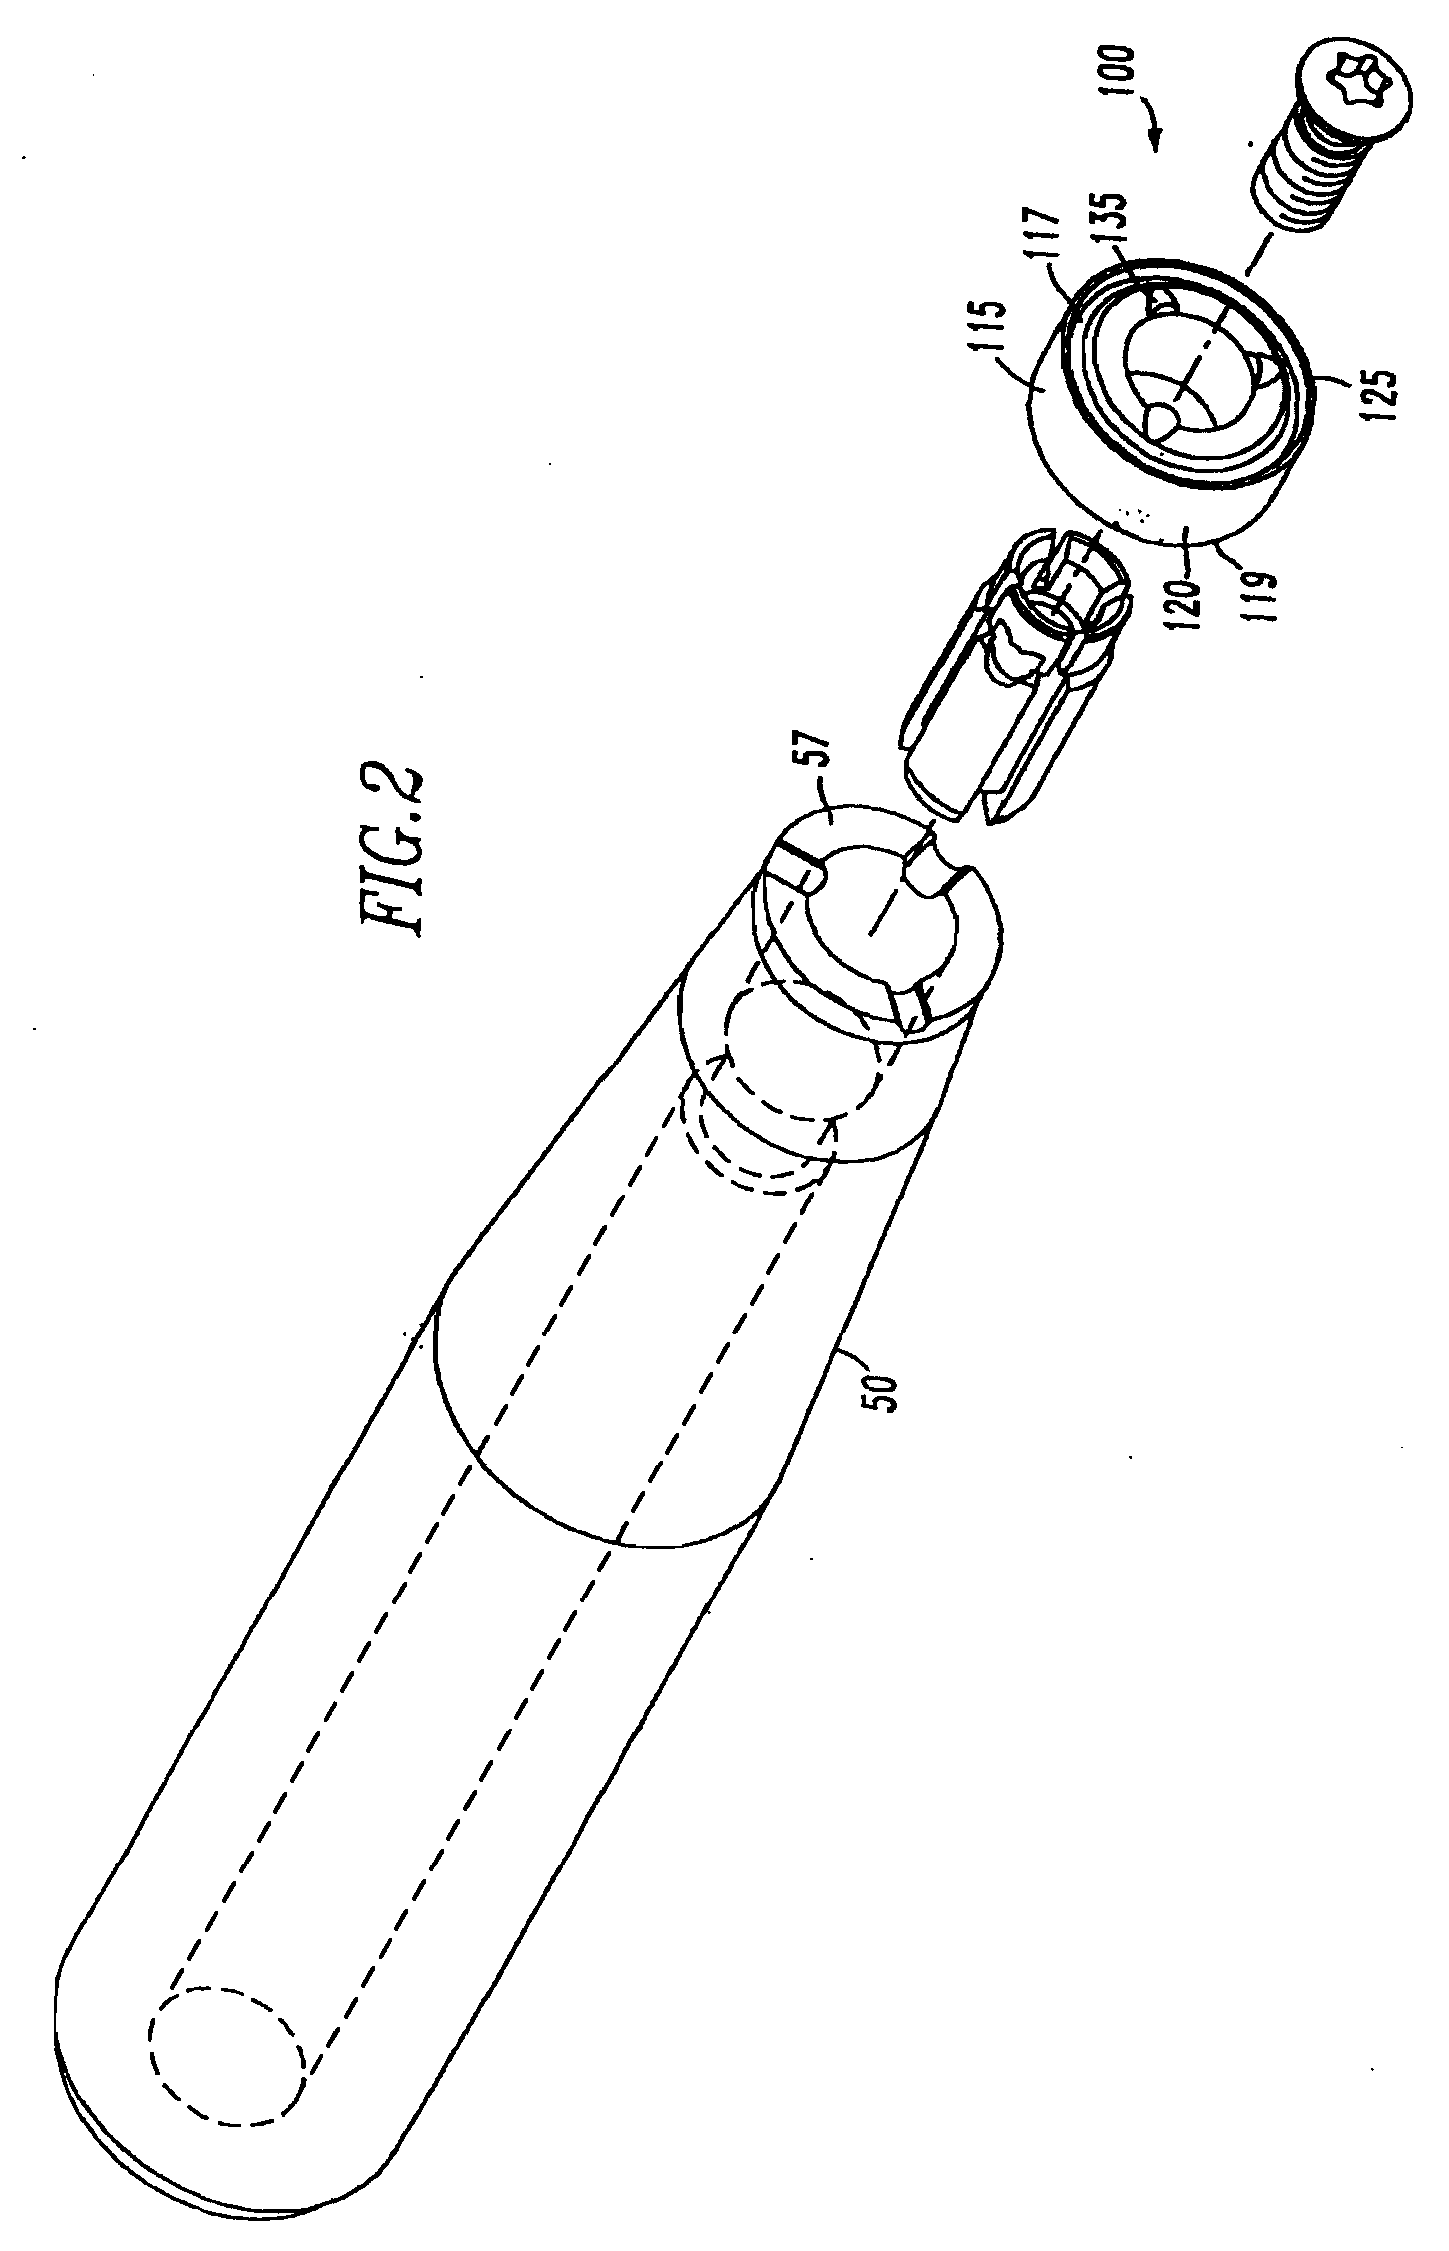 Assembly For Rotating A Cutting Insert During A Turning Operation And Inserts Used Therein